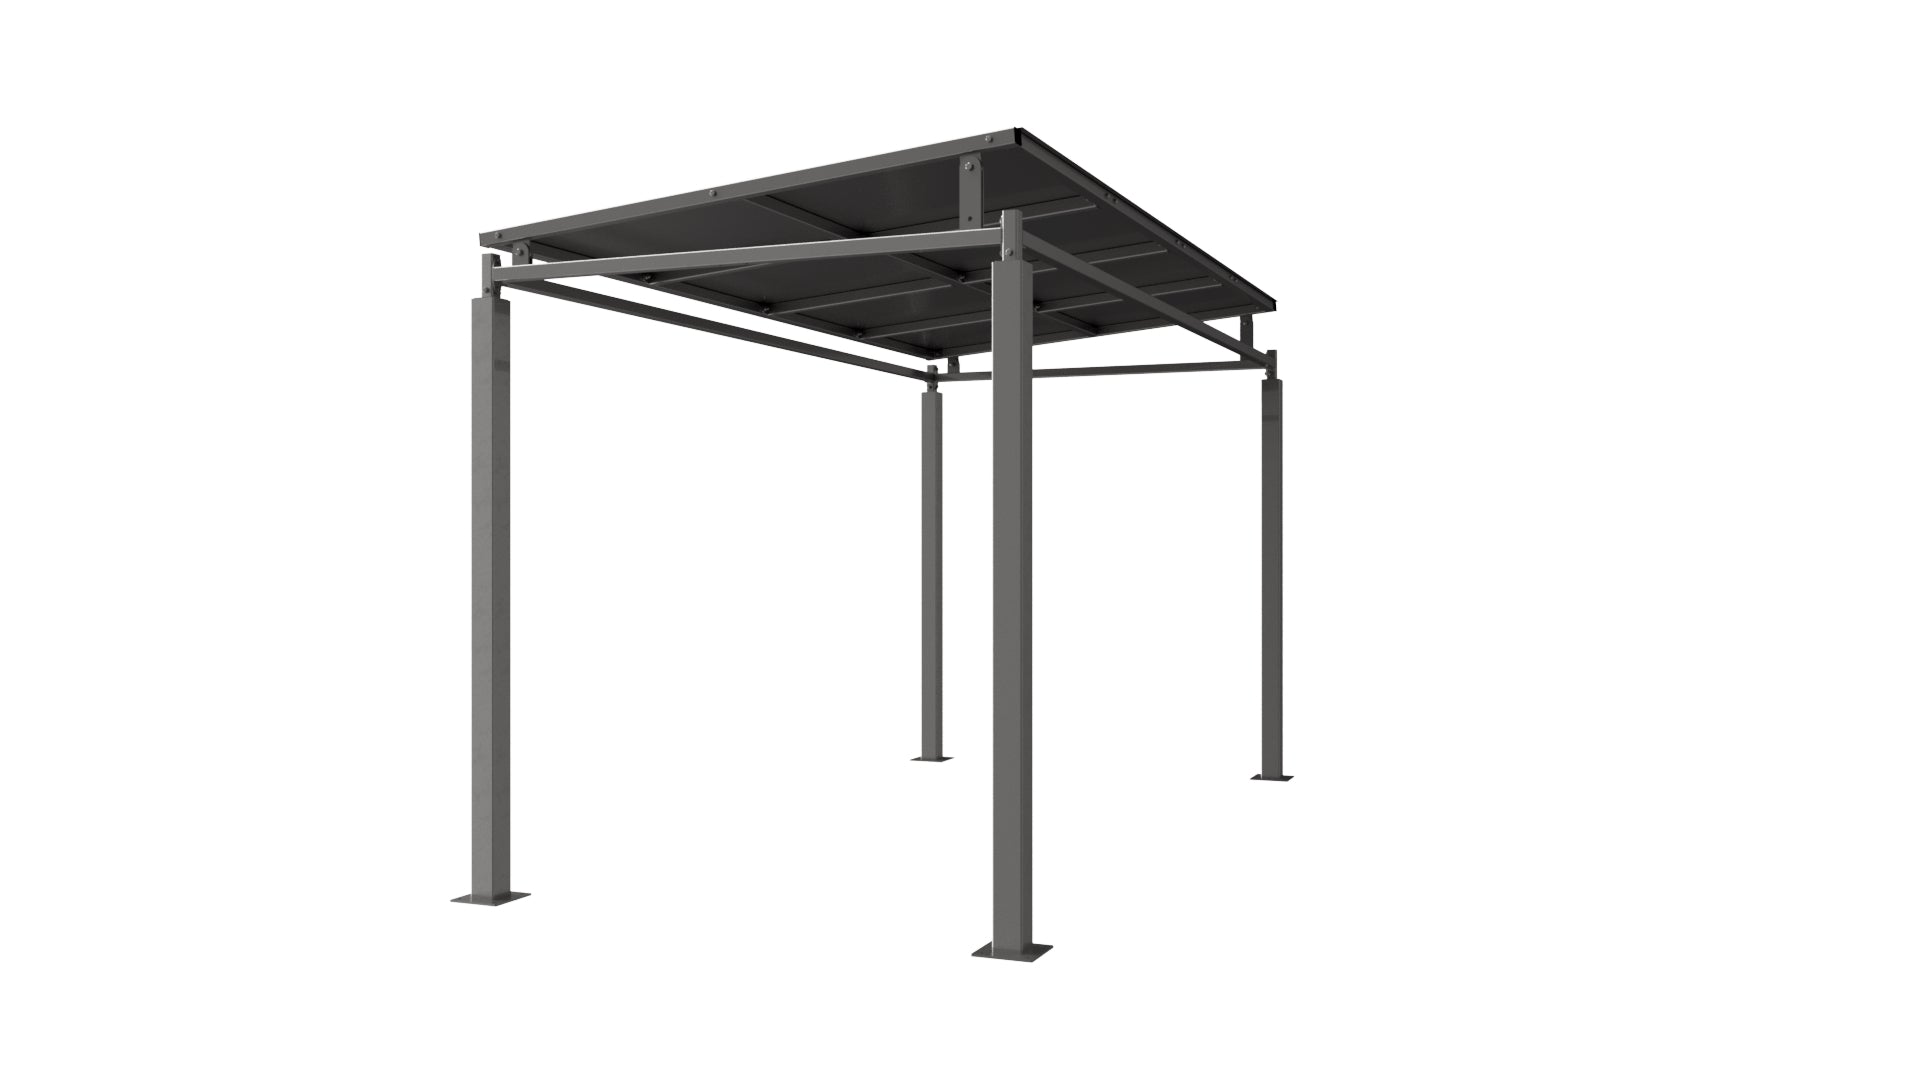 Bedford Cycle / Smoking Shelter Galvanised Steel Frame Open Sided